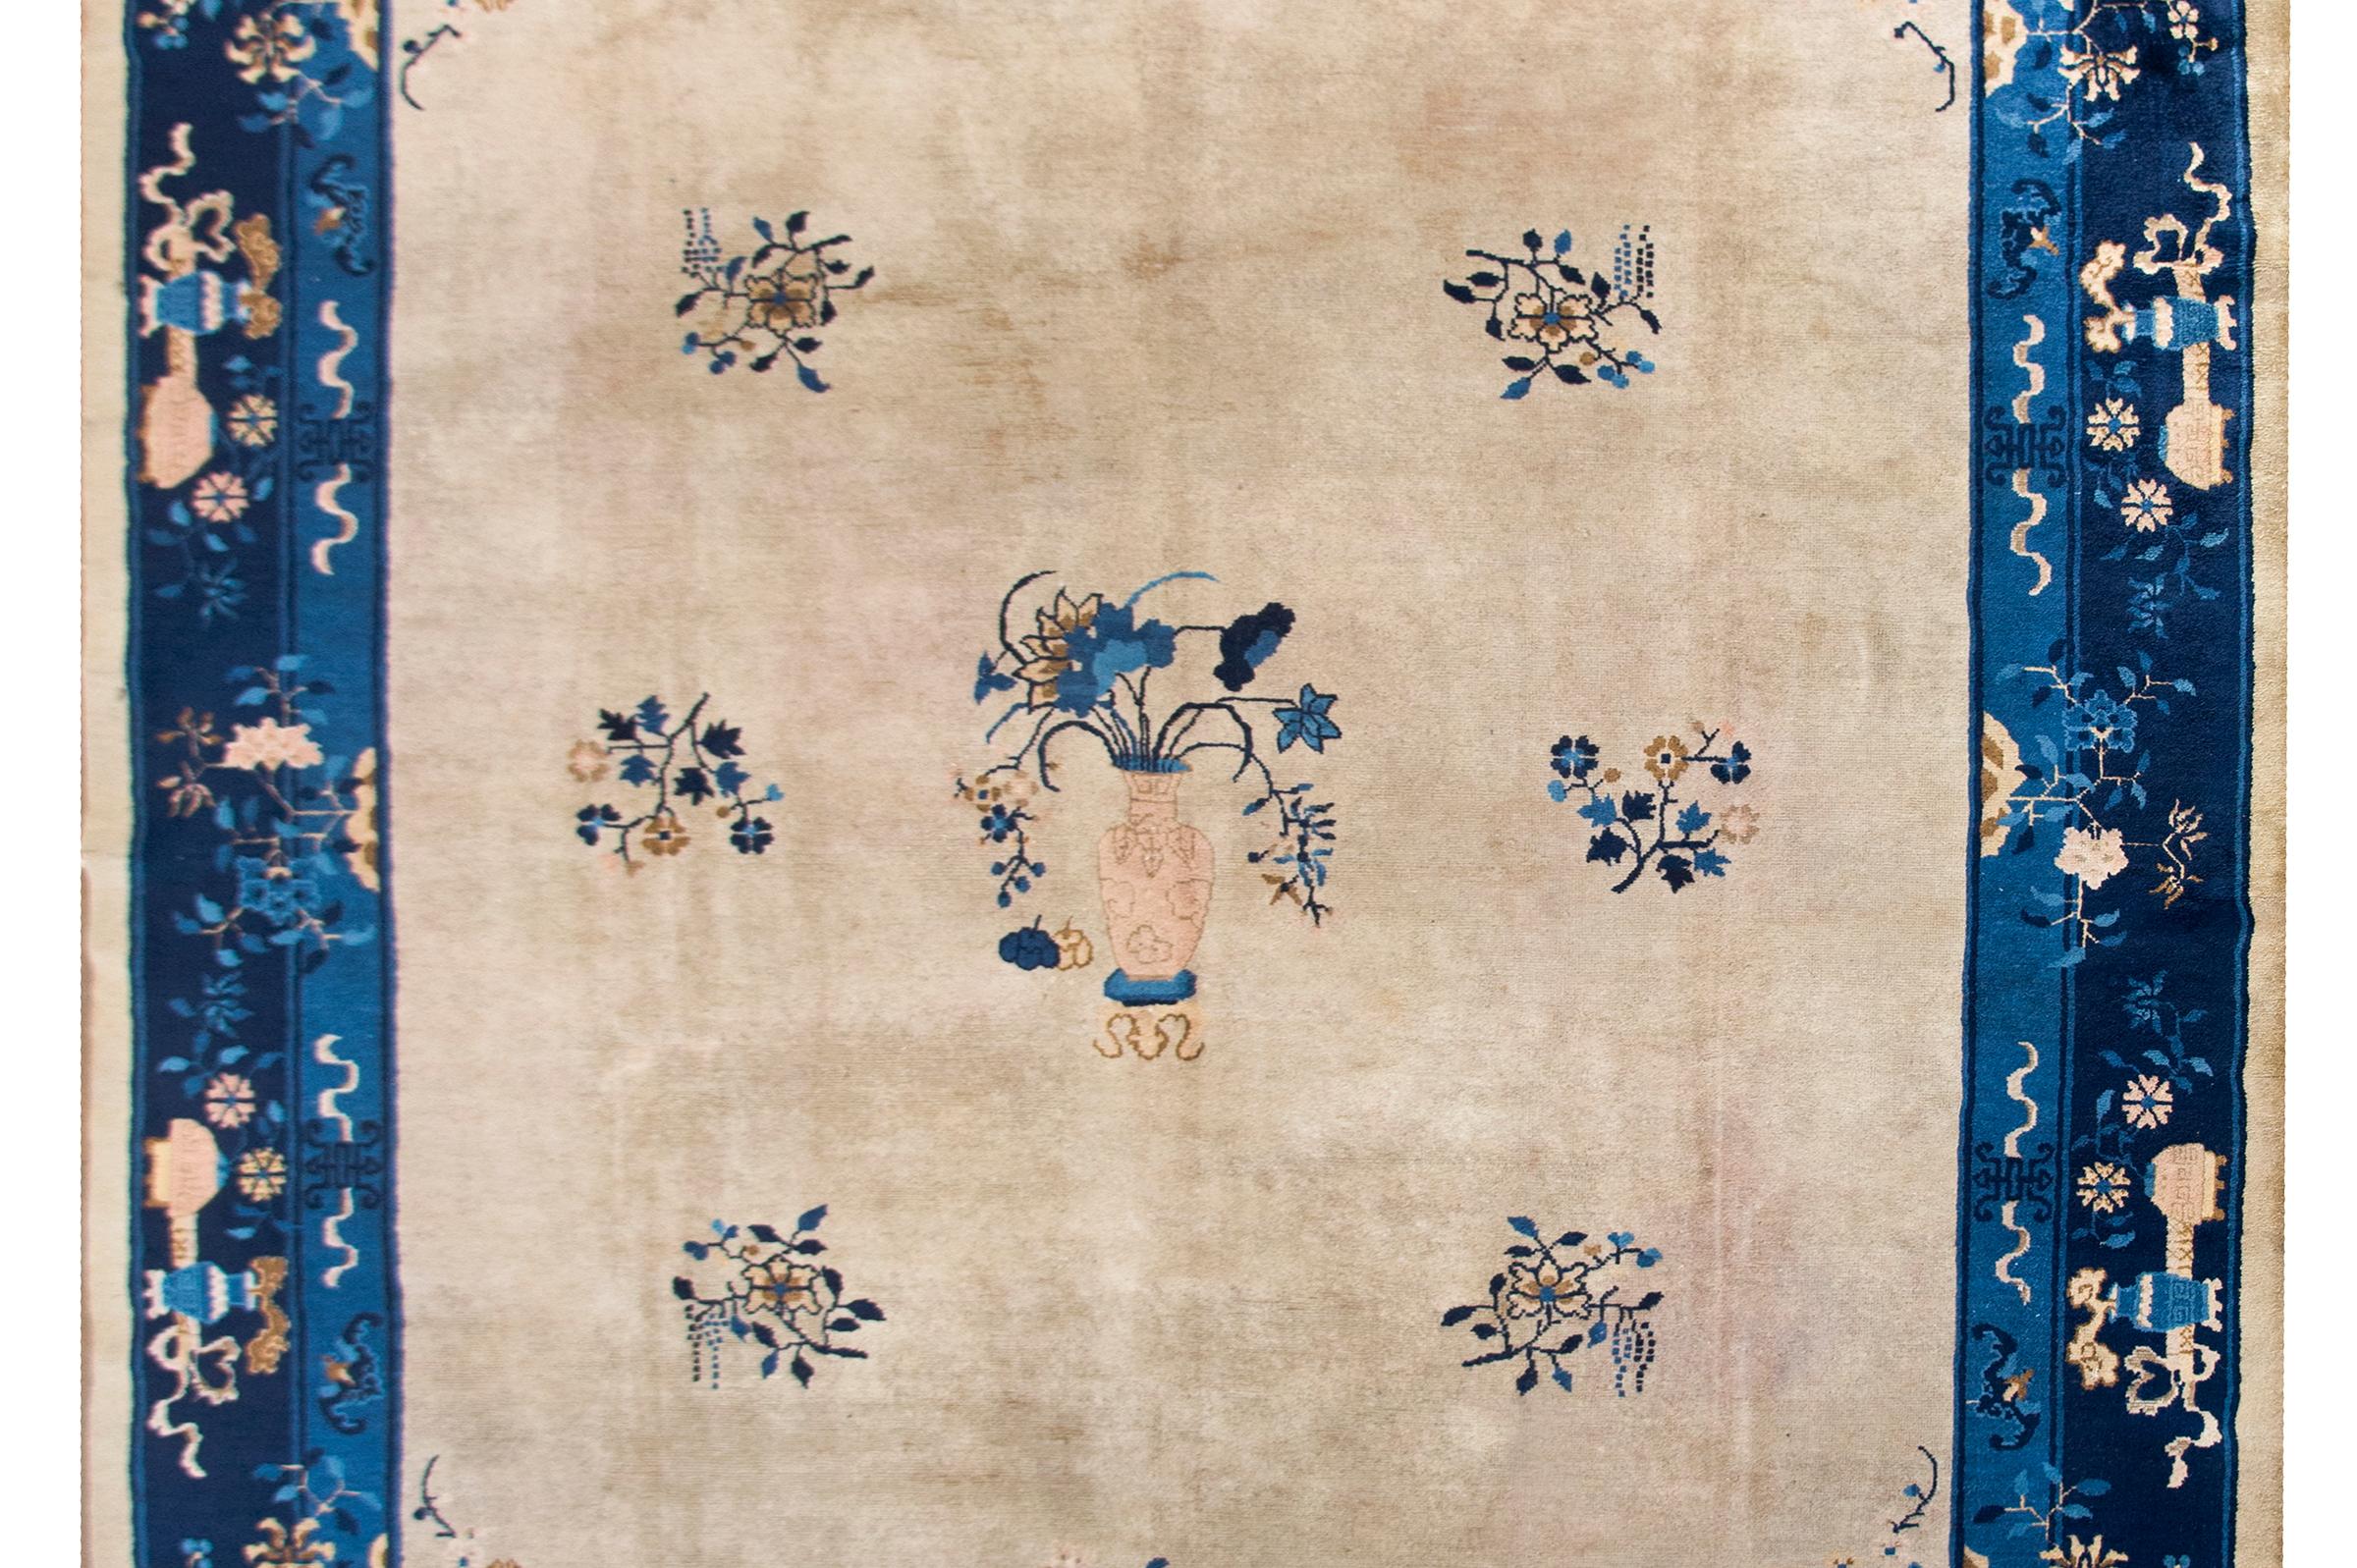 A beautiful early 20th century Chinese Feti rug with a cream colored central field dotted with floral clusters and a large central vase potted with lotus blossoms, and all surrounded by a fantastic border with myriad vases potted with auspicious